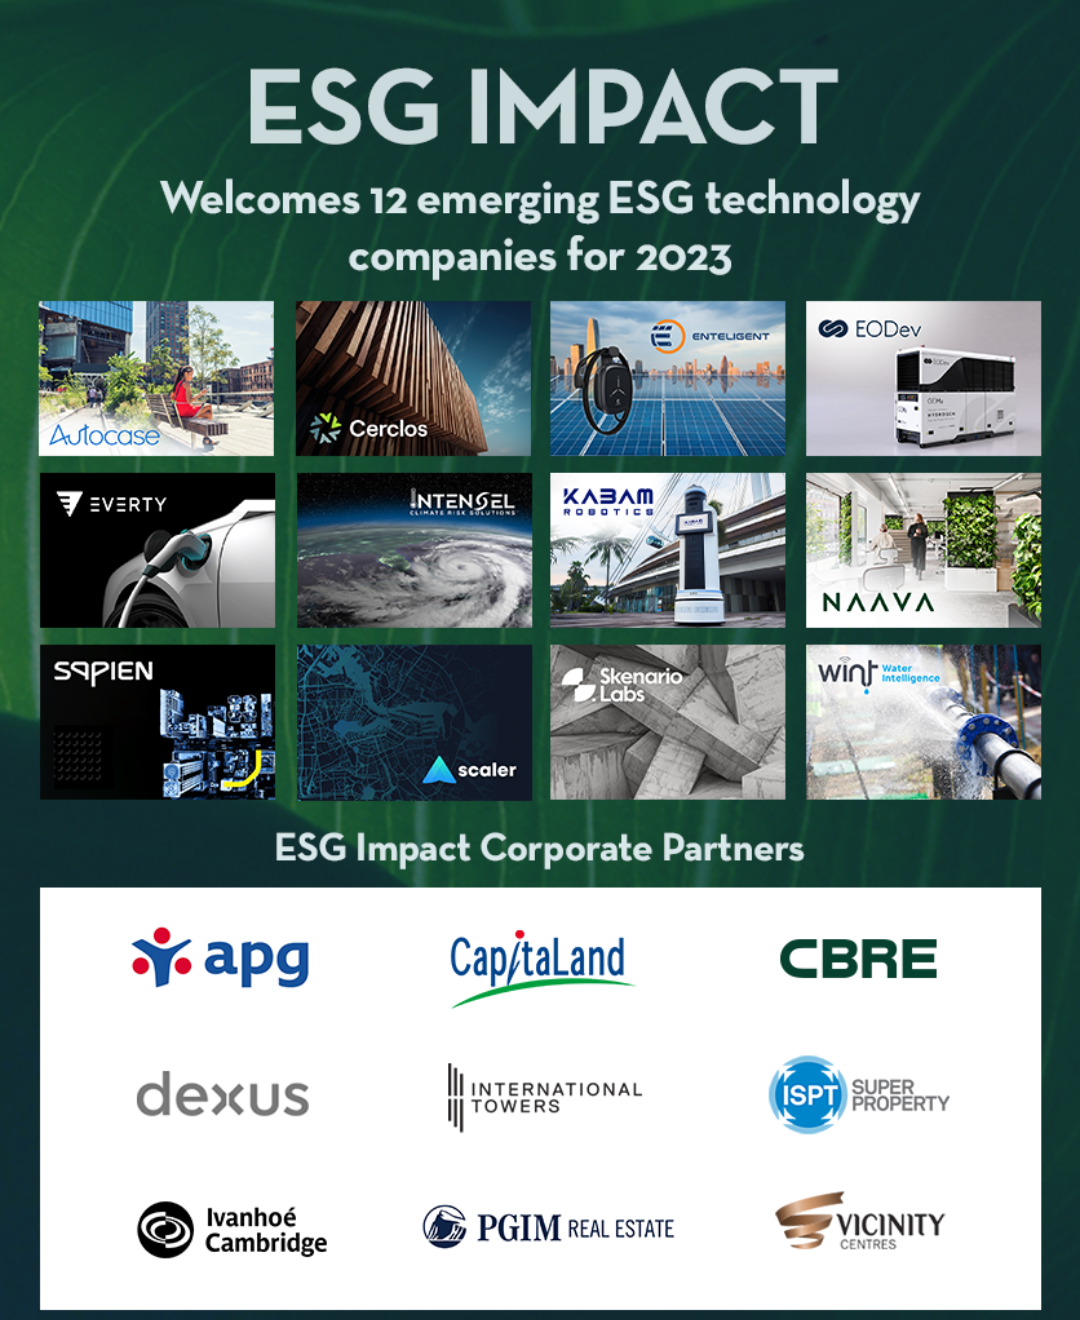 Enteligent secures one of 12 spots in coveted ESG Impact Innovation Program for 2023